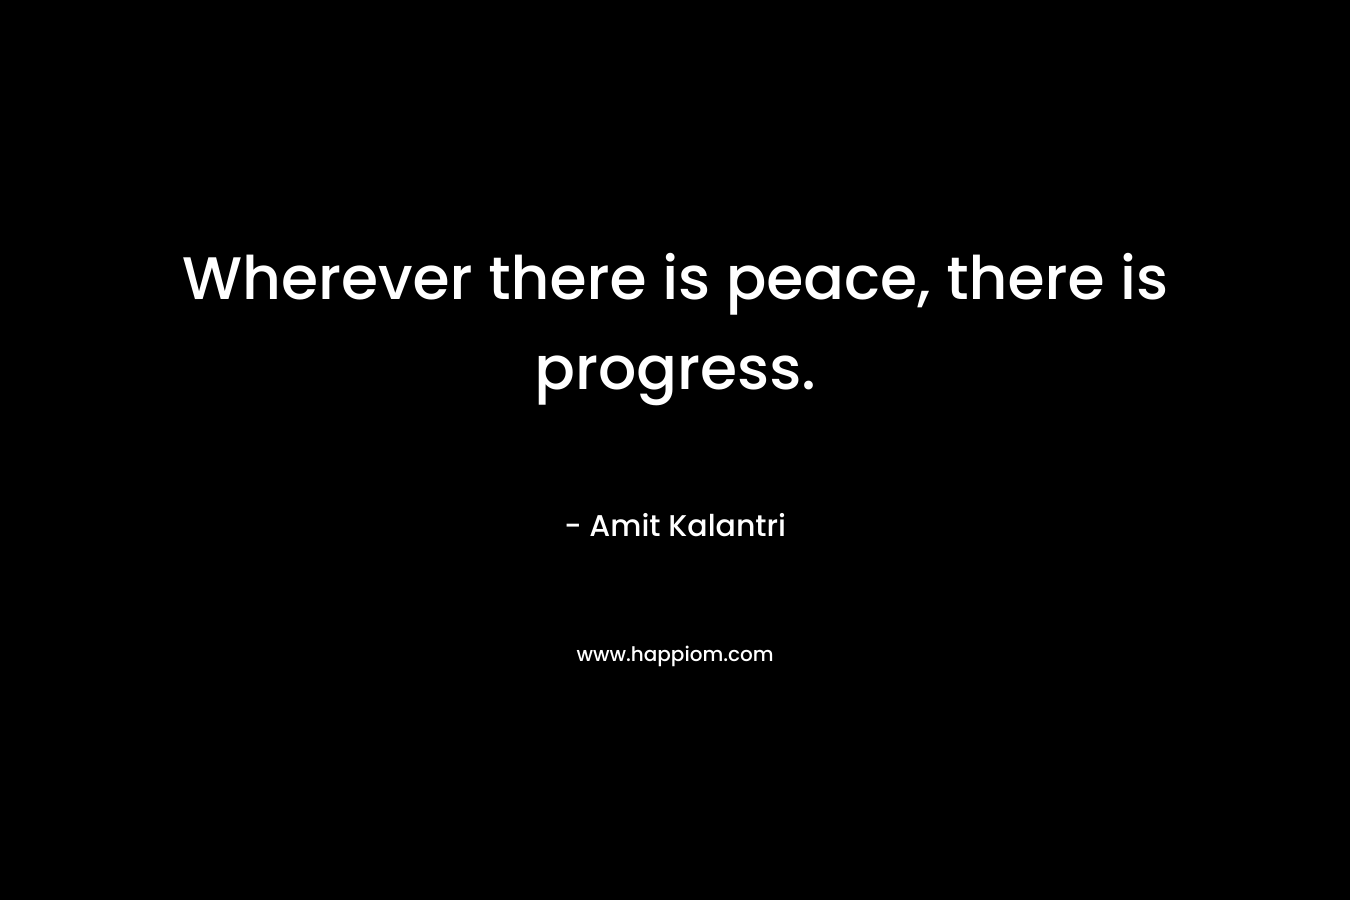 Wherever there is peace, there is progress.